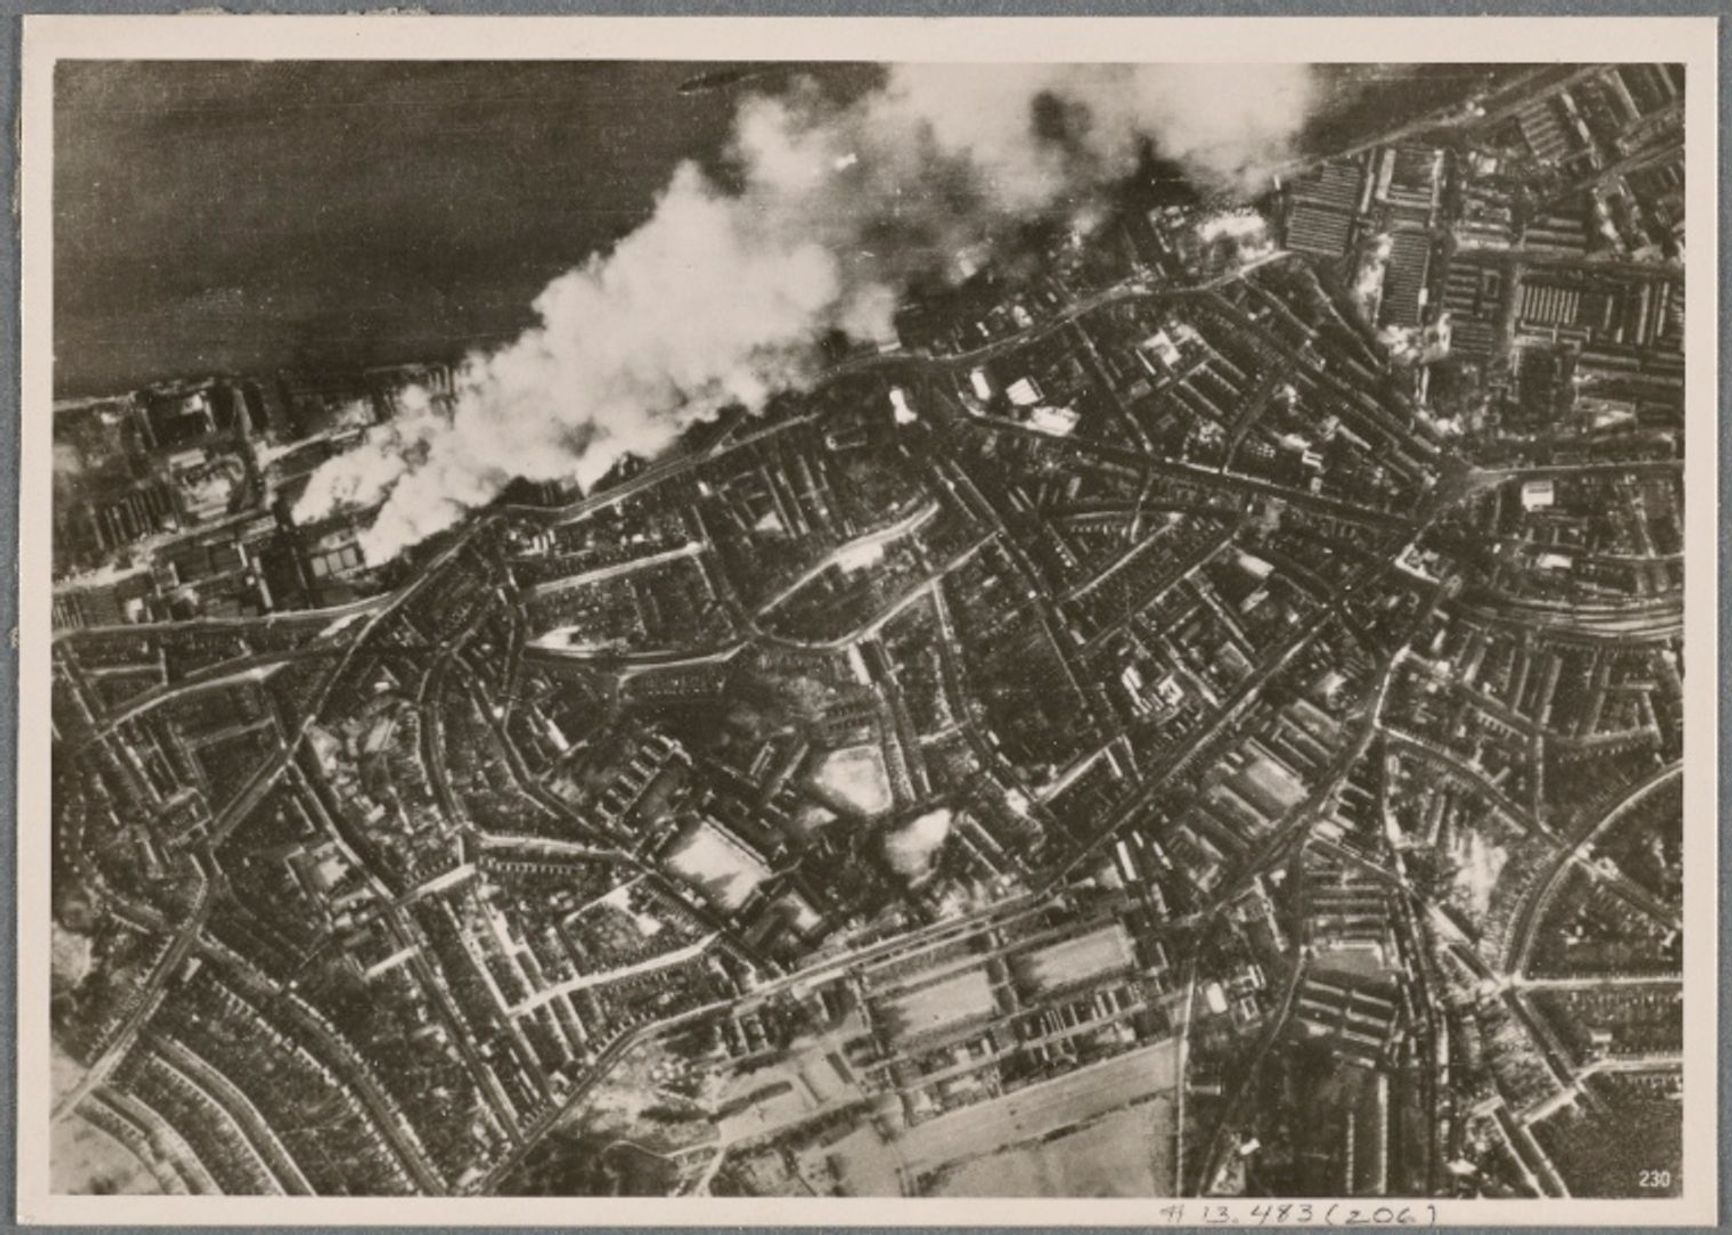 A photo in a German newspaper illustrating a report on the bombing of London. The city's docks and warehouses are on fire after Luftwaffe raids. 1940